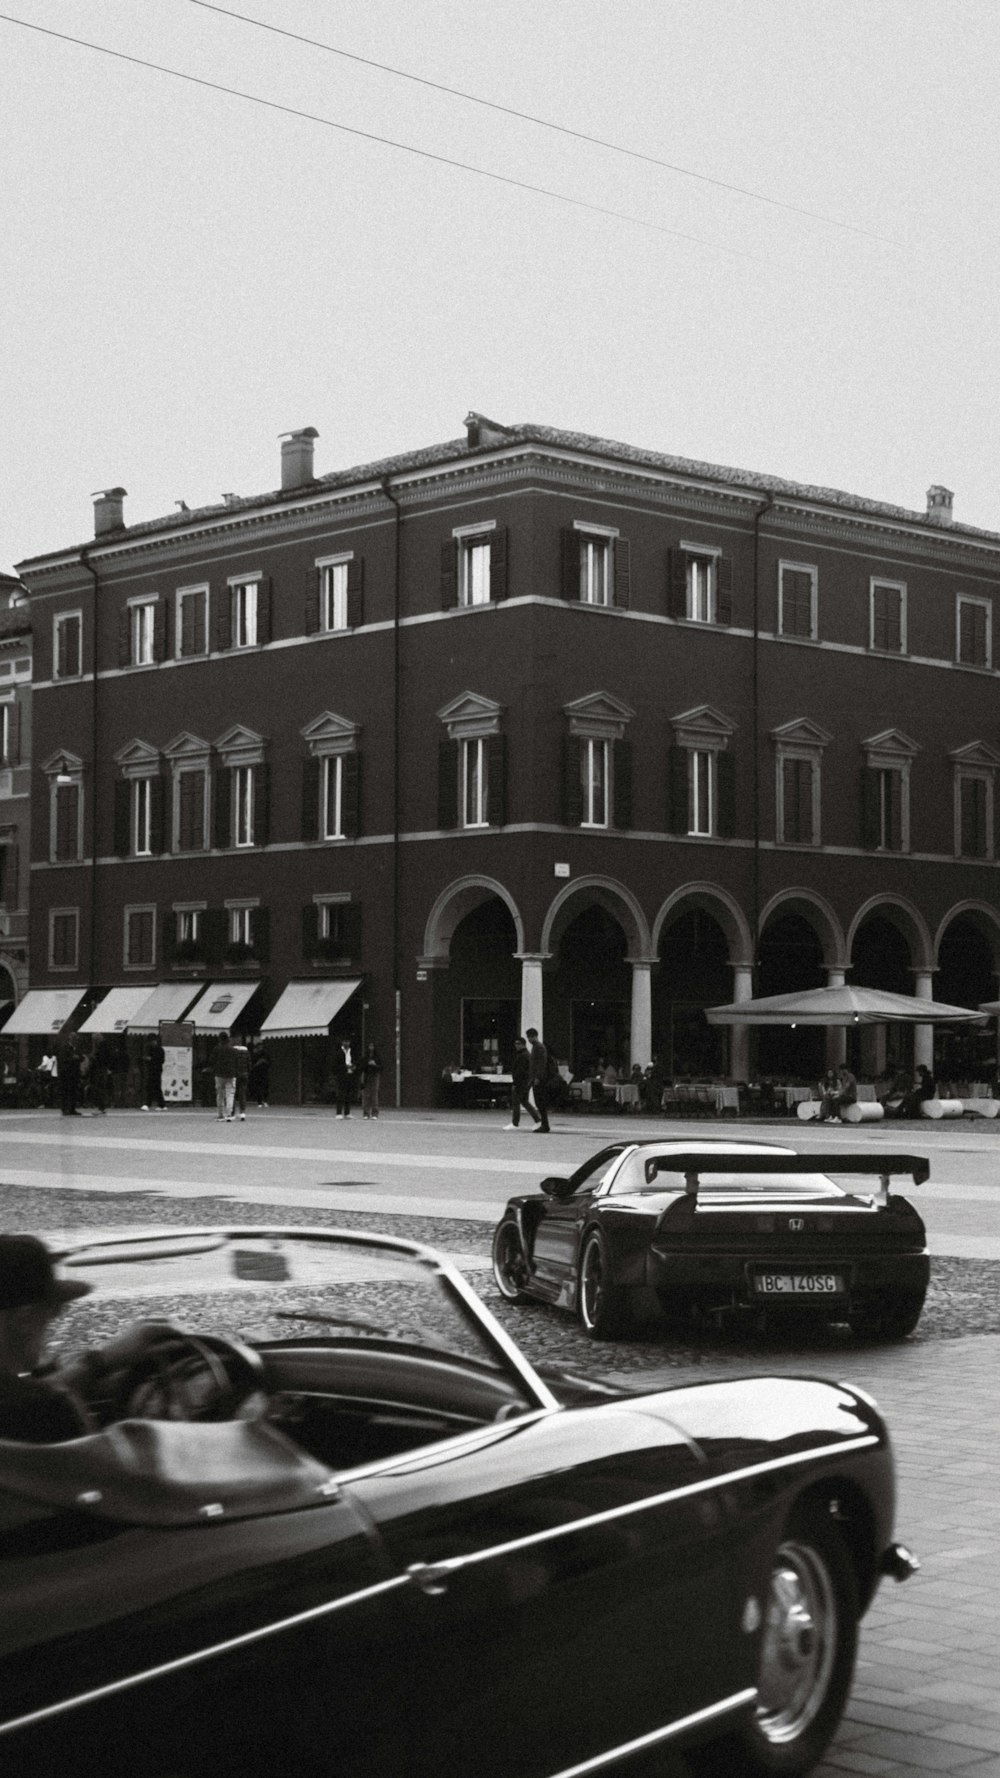 a black and white photo of a building and cars